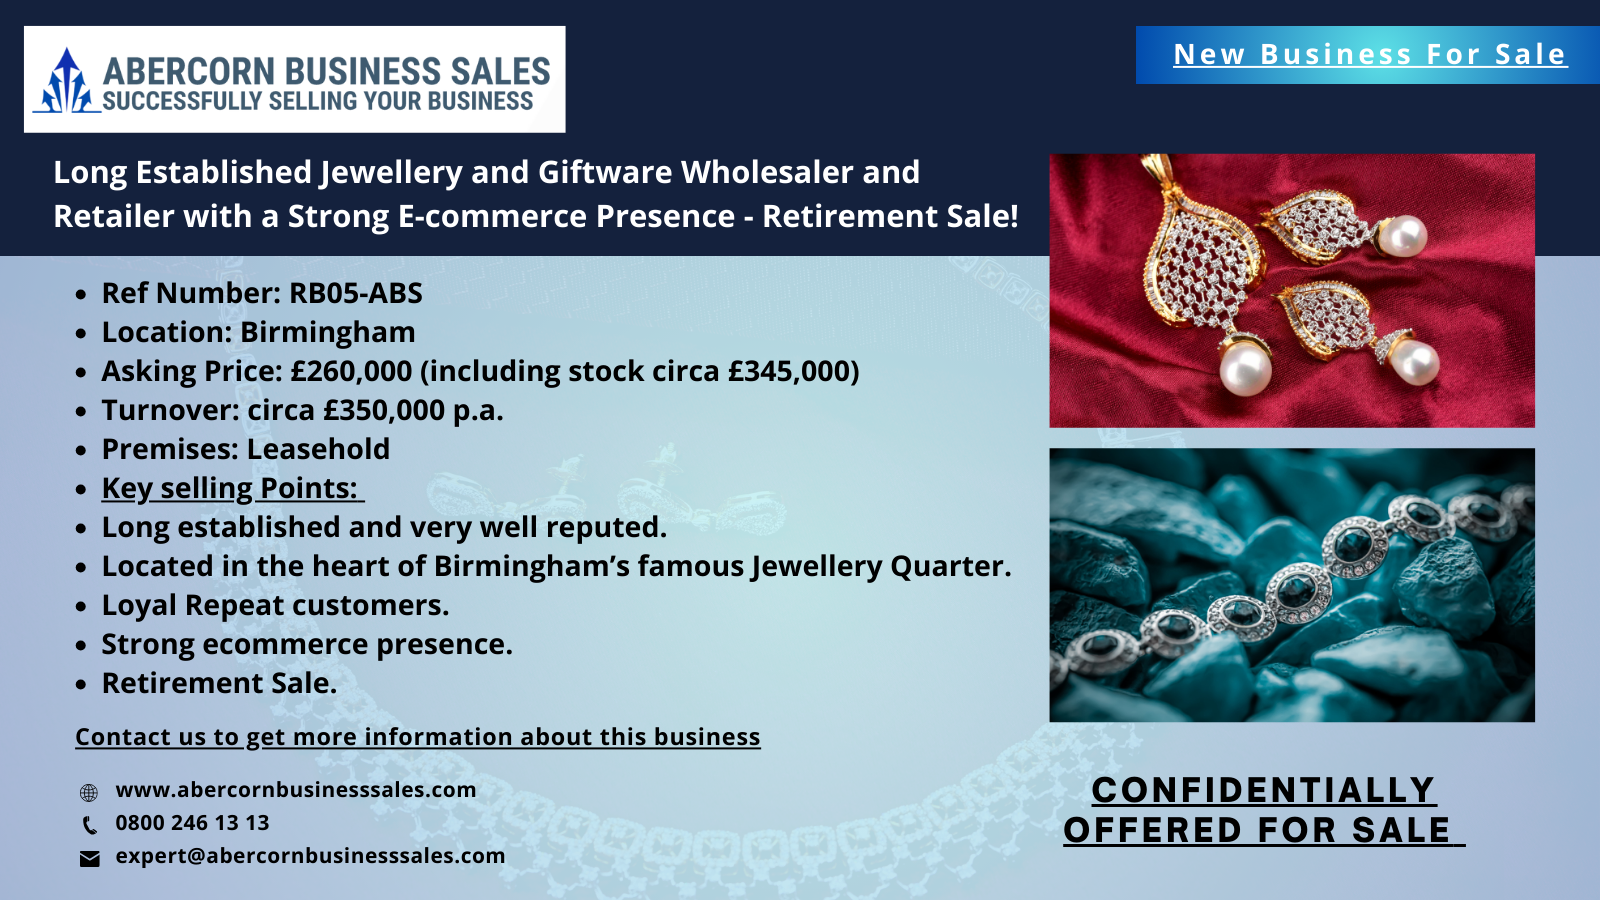 RB05-ABS - Long Established Jewellery and Giftware Wholesaler and Retailer with a Strong E-commerce Presence - Retirement Sale